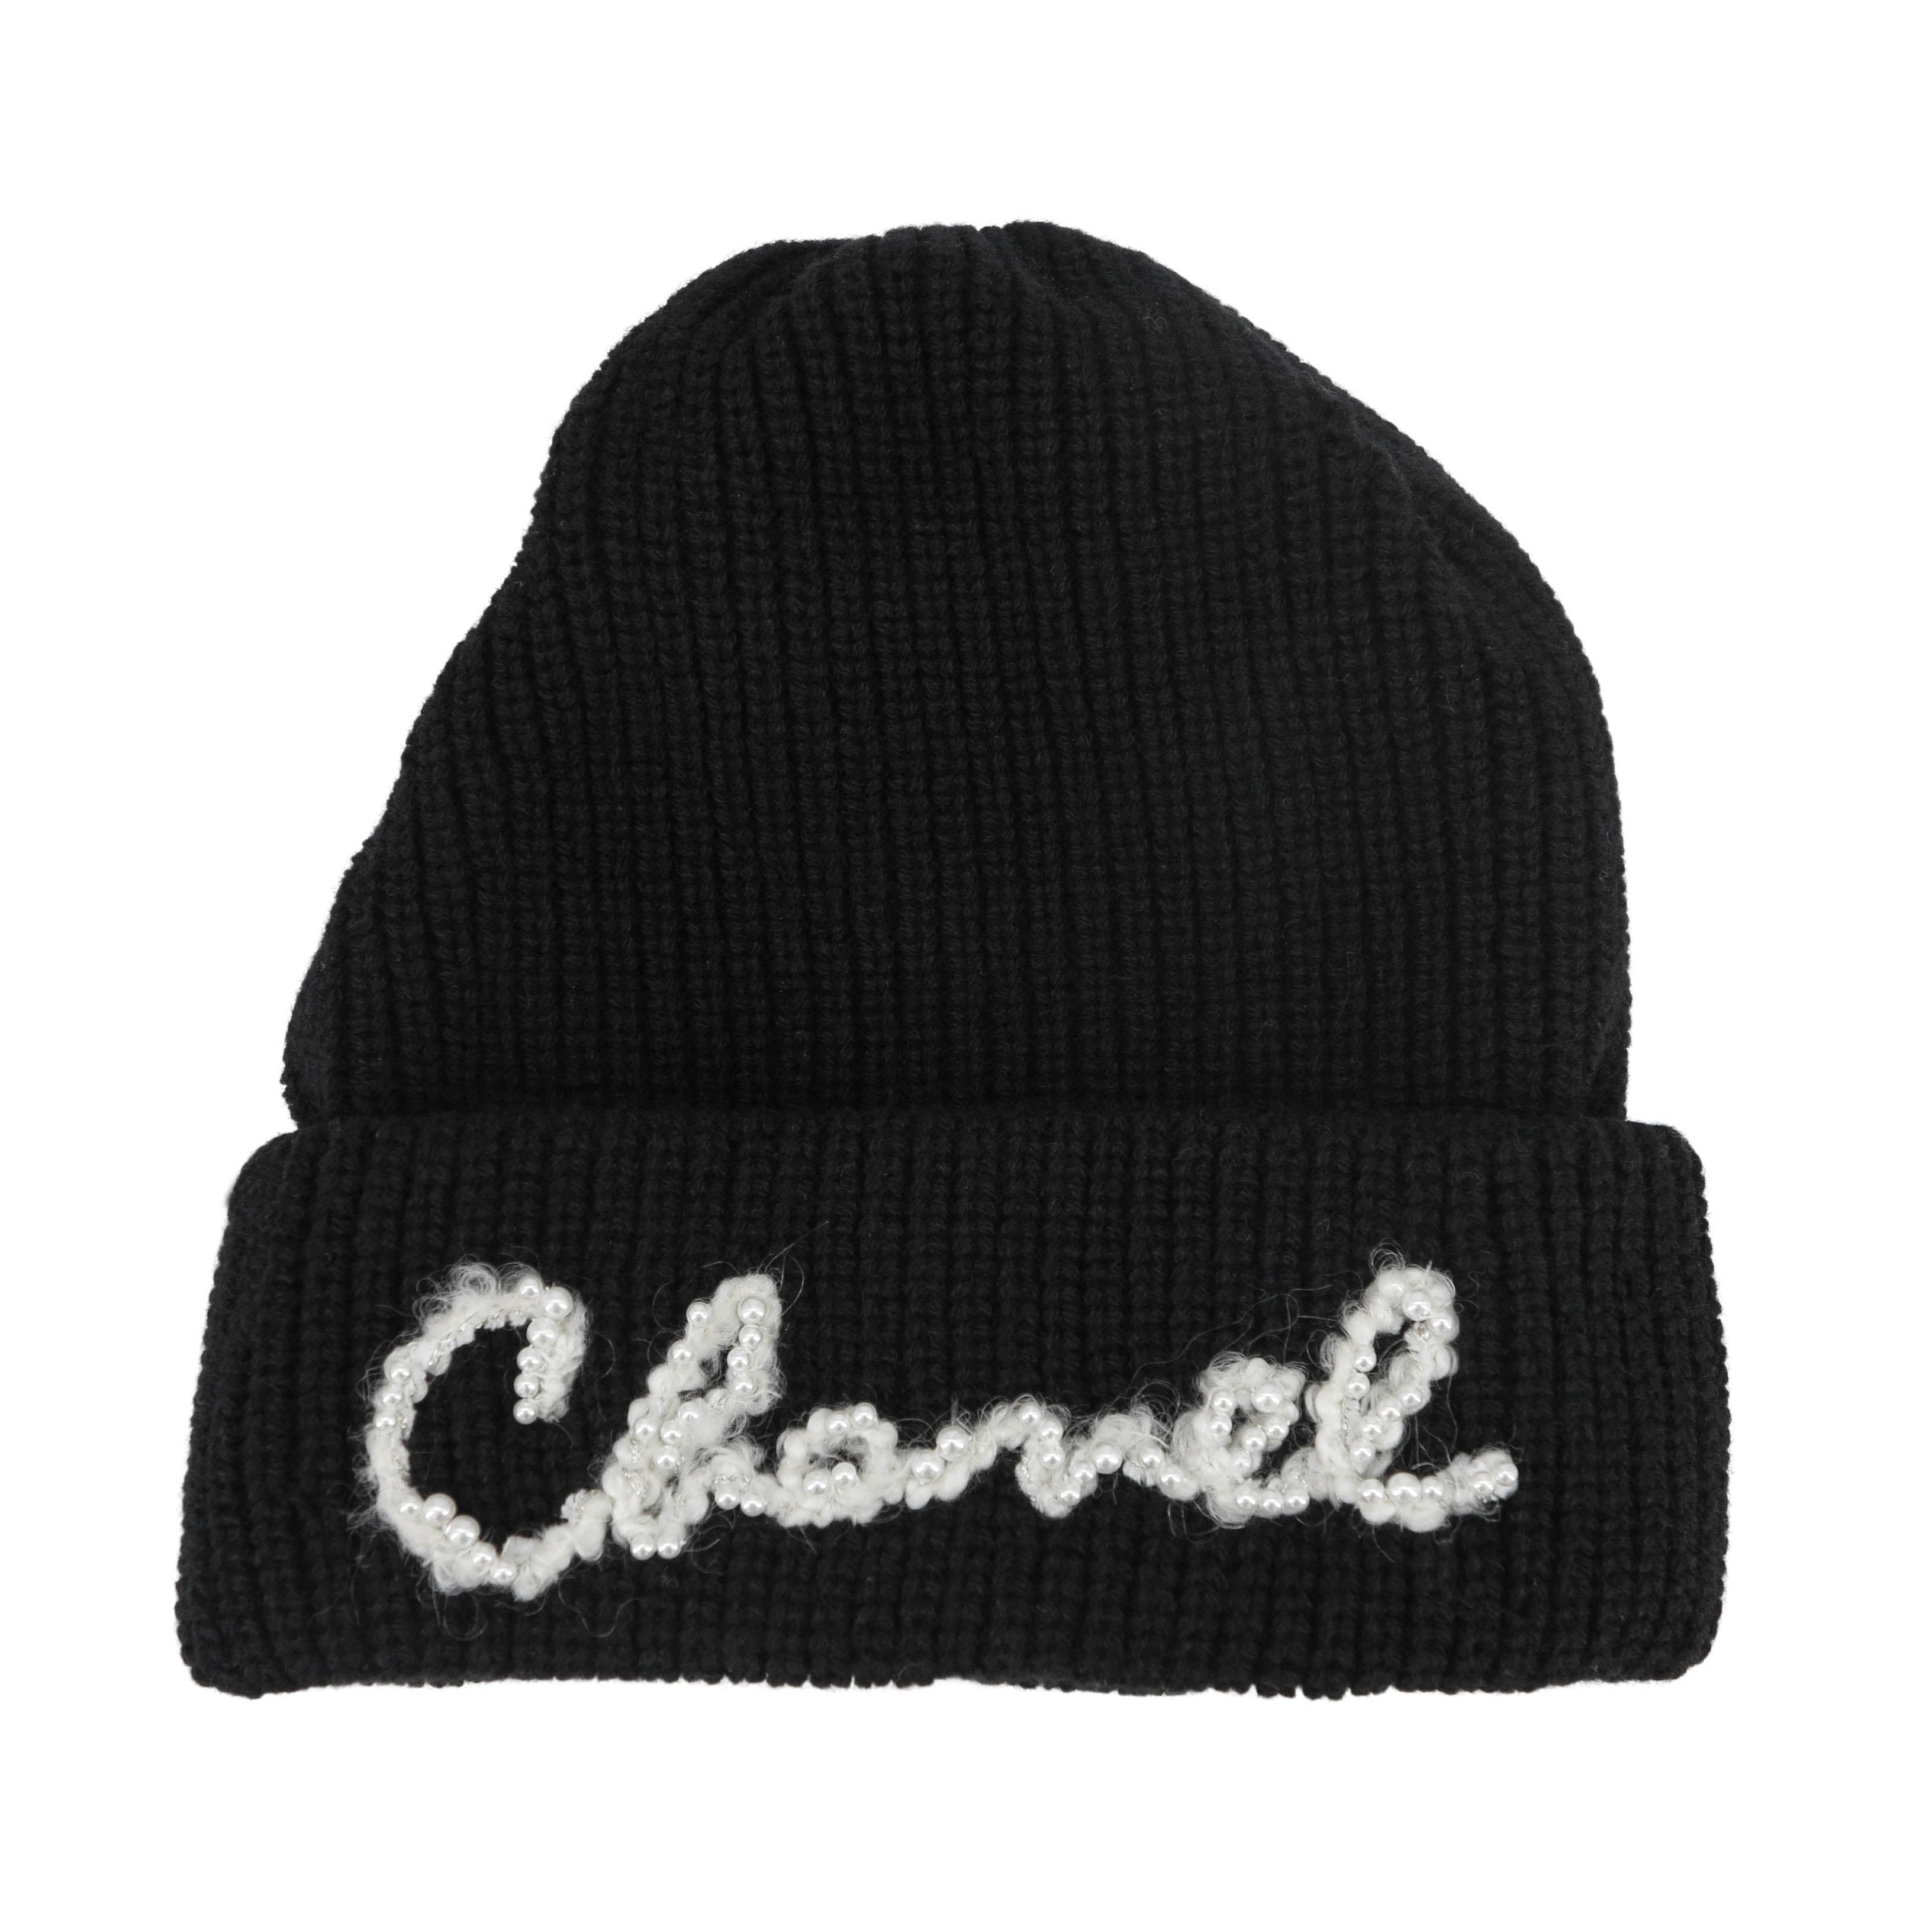 Chanel - Authenticated Hat - Cashmere Black Plain for Women, Never Worn